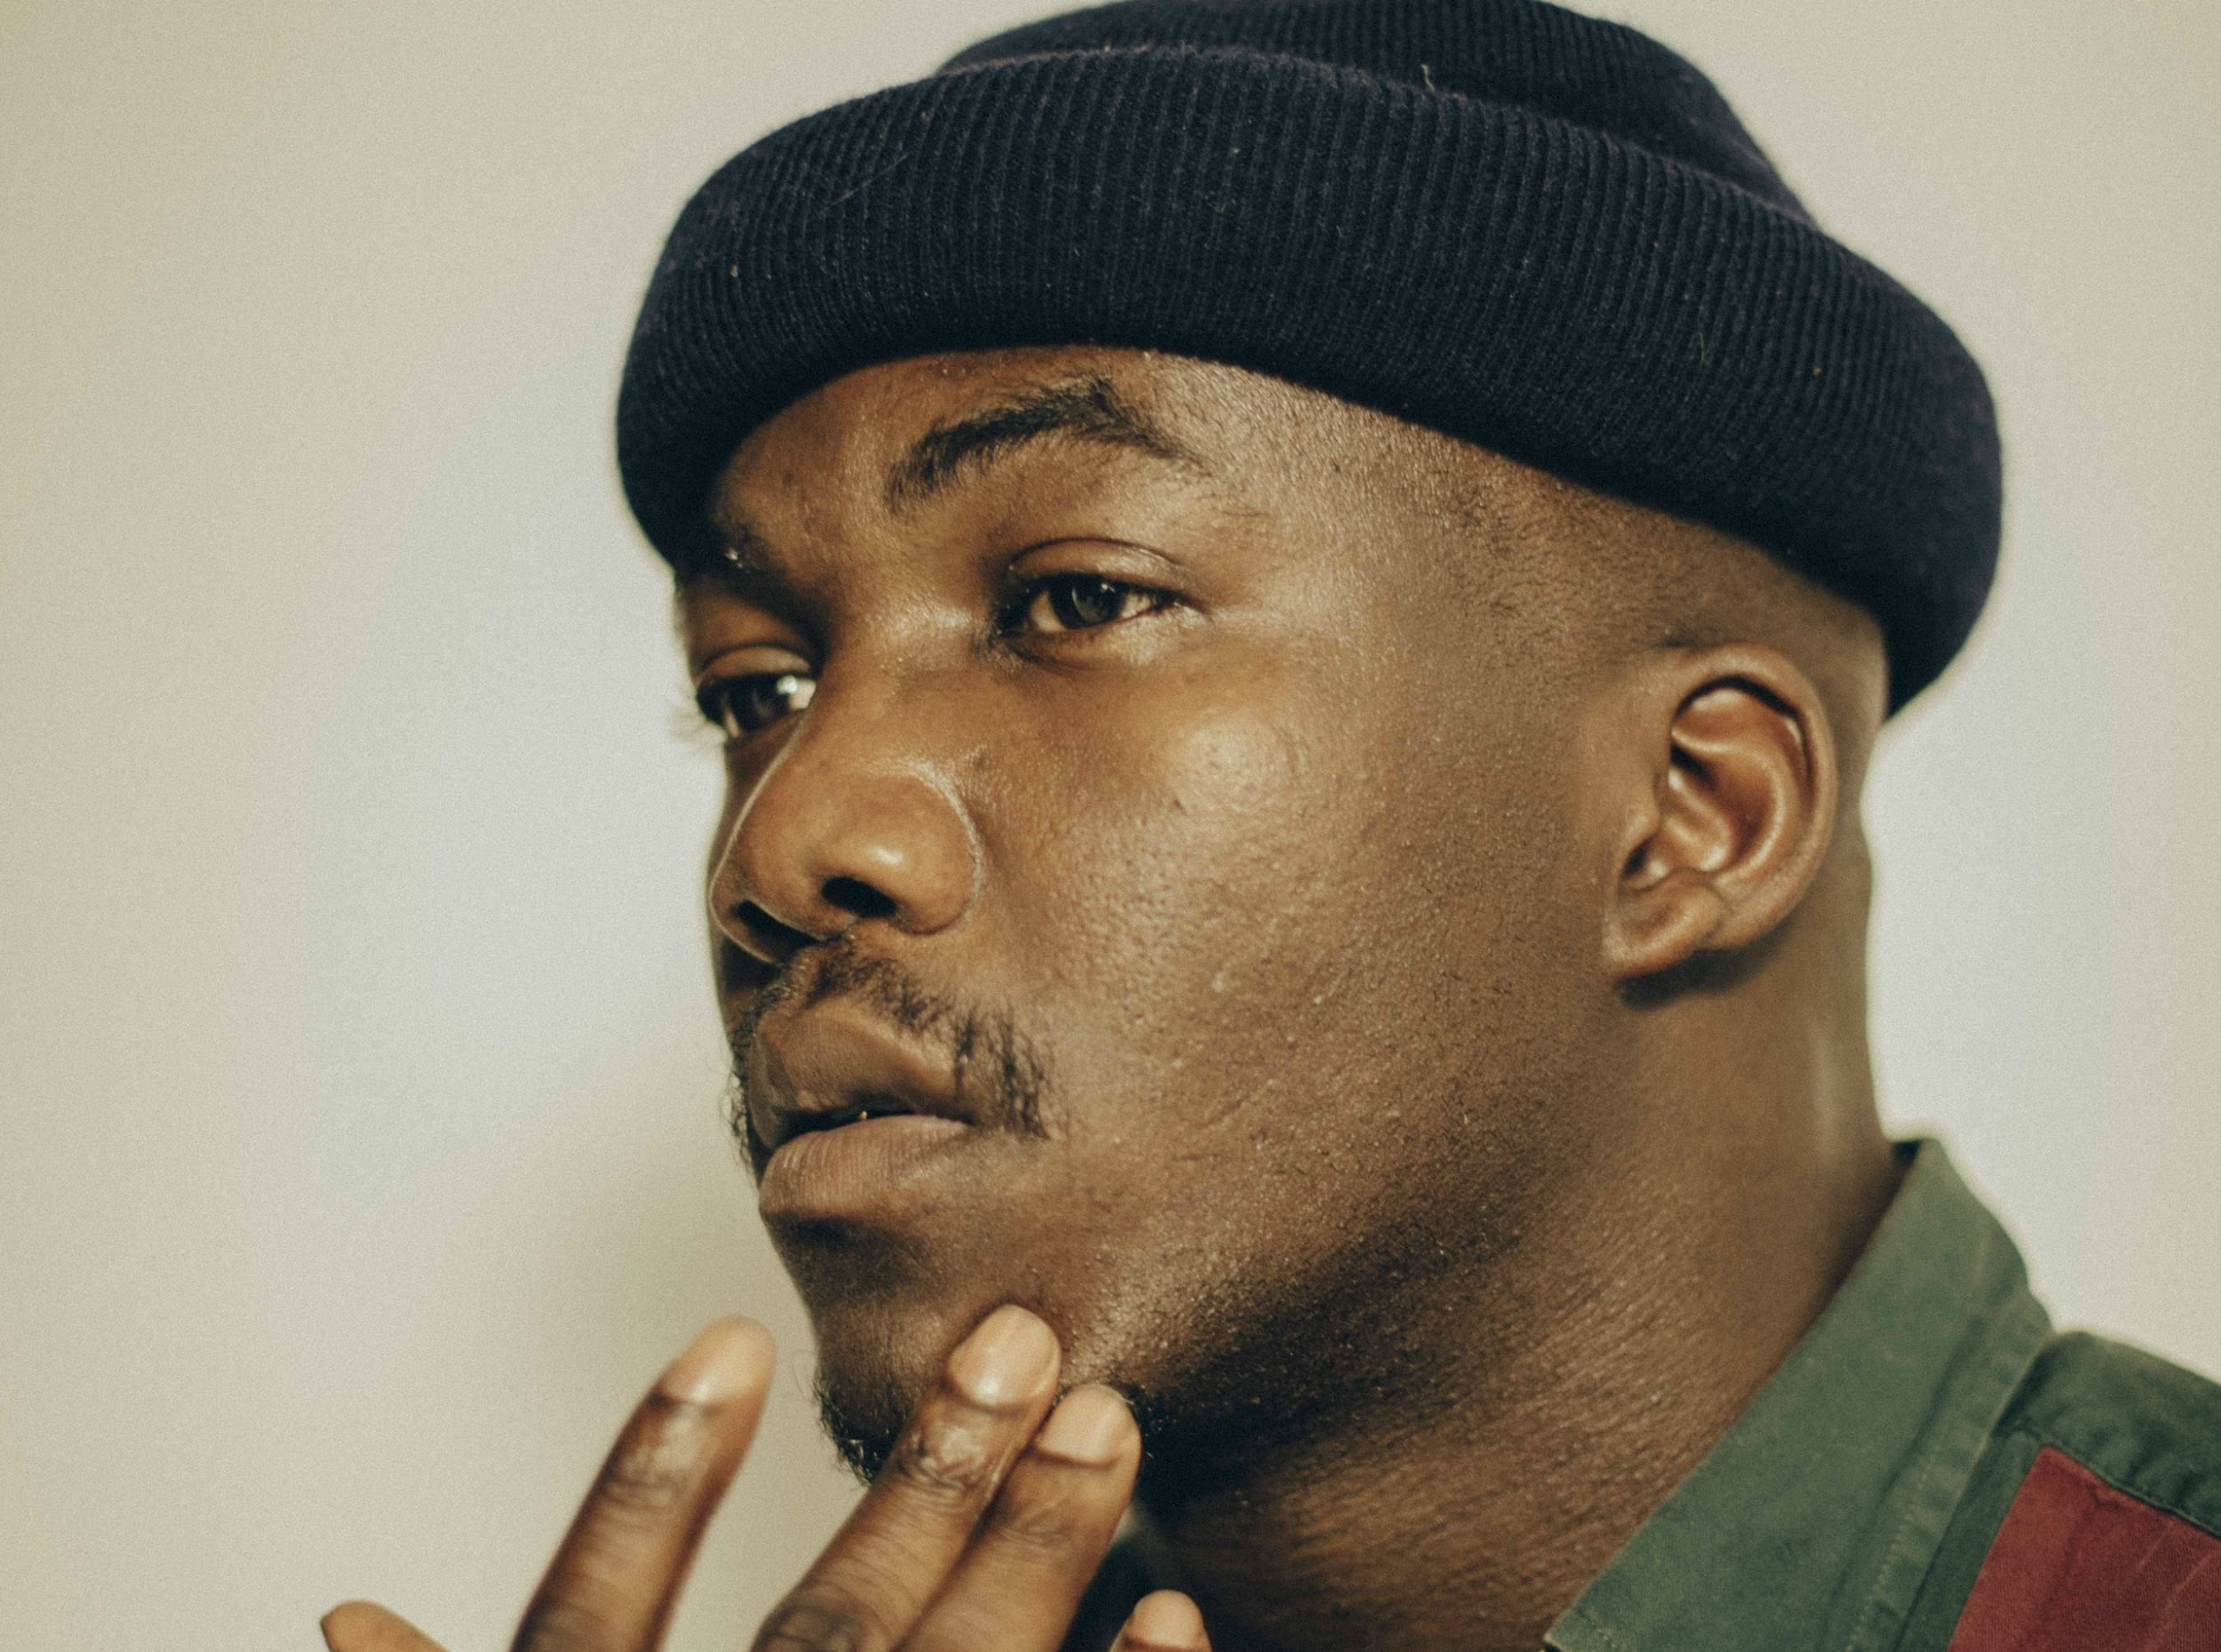 Jacob Banks, Introducing, Unknown to you, Singer, 2500x1860 HD Desktop